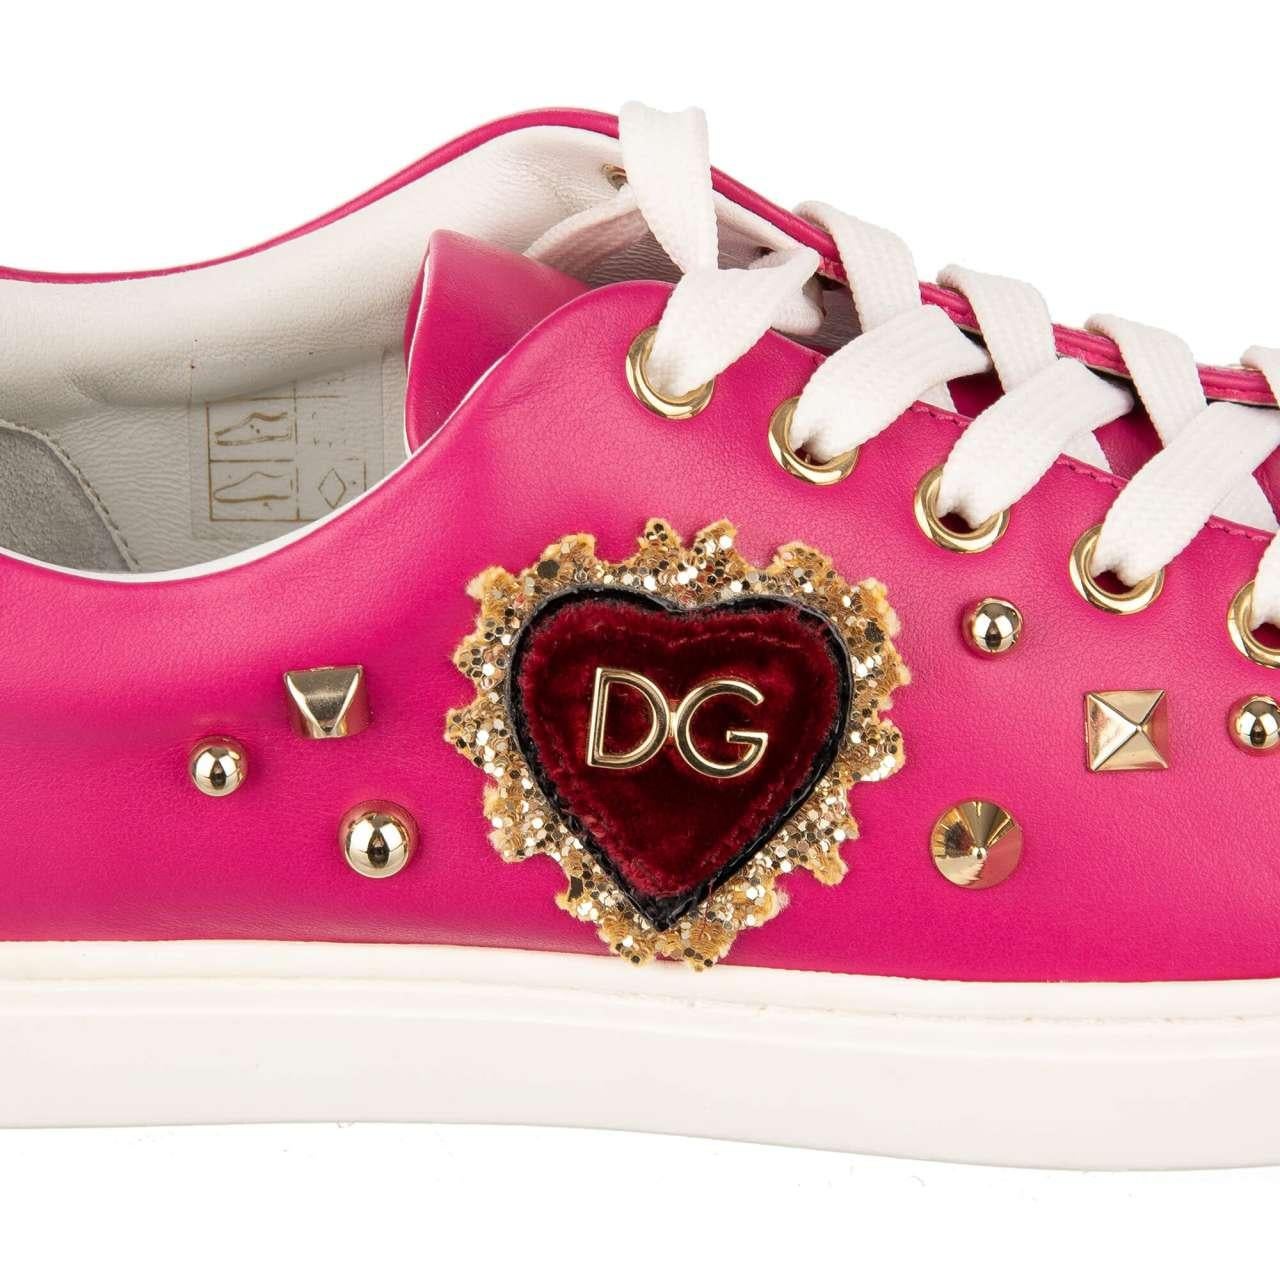 - Leather Sneaker LONDON with DG velvet Heart patch and studs in pink and white by DOLCE & GABBANA - New with Box - MADE IN ITALY - Model: CK0167-B5320-8H407 - Material: 100% Calf leather - Sole: Rubber - Color: White / Pink - DG Heart velvet